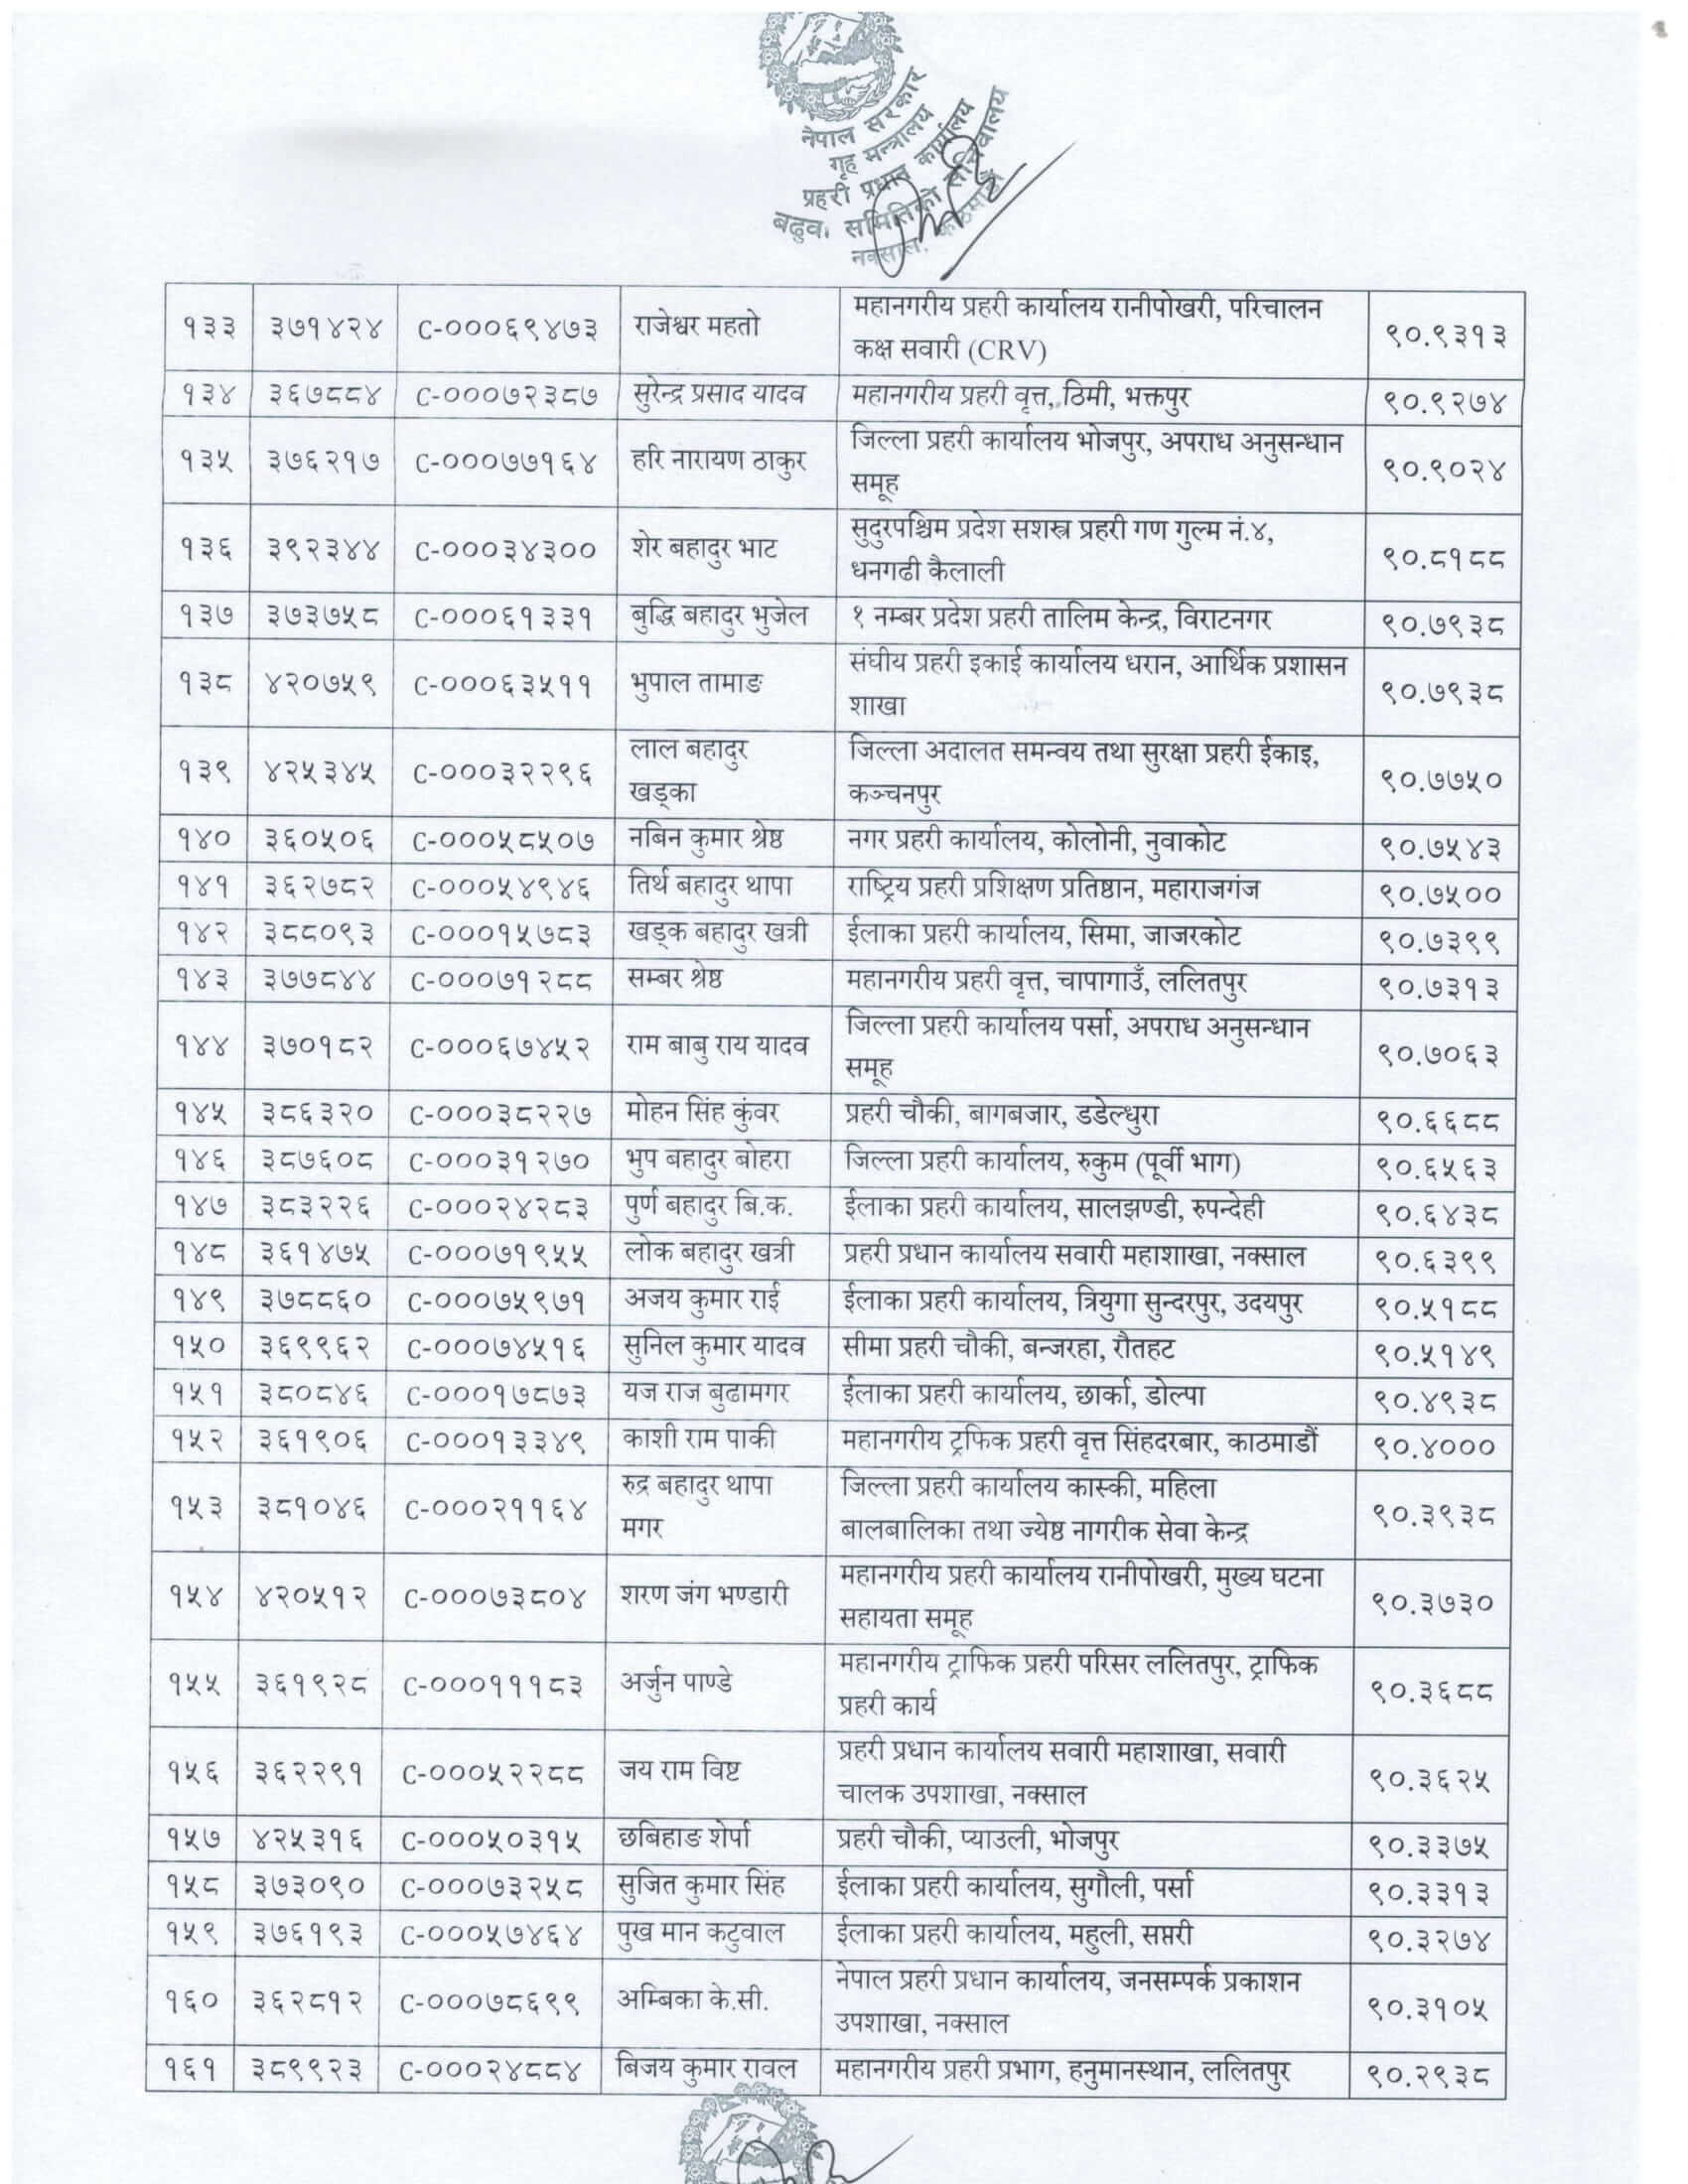 Nepal Police Promotion List From Head Constable to ASI